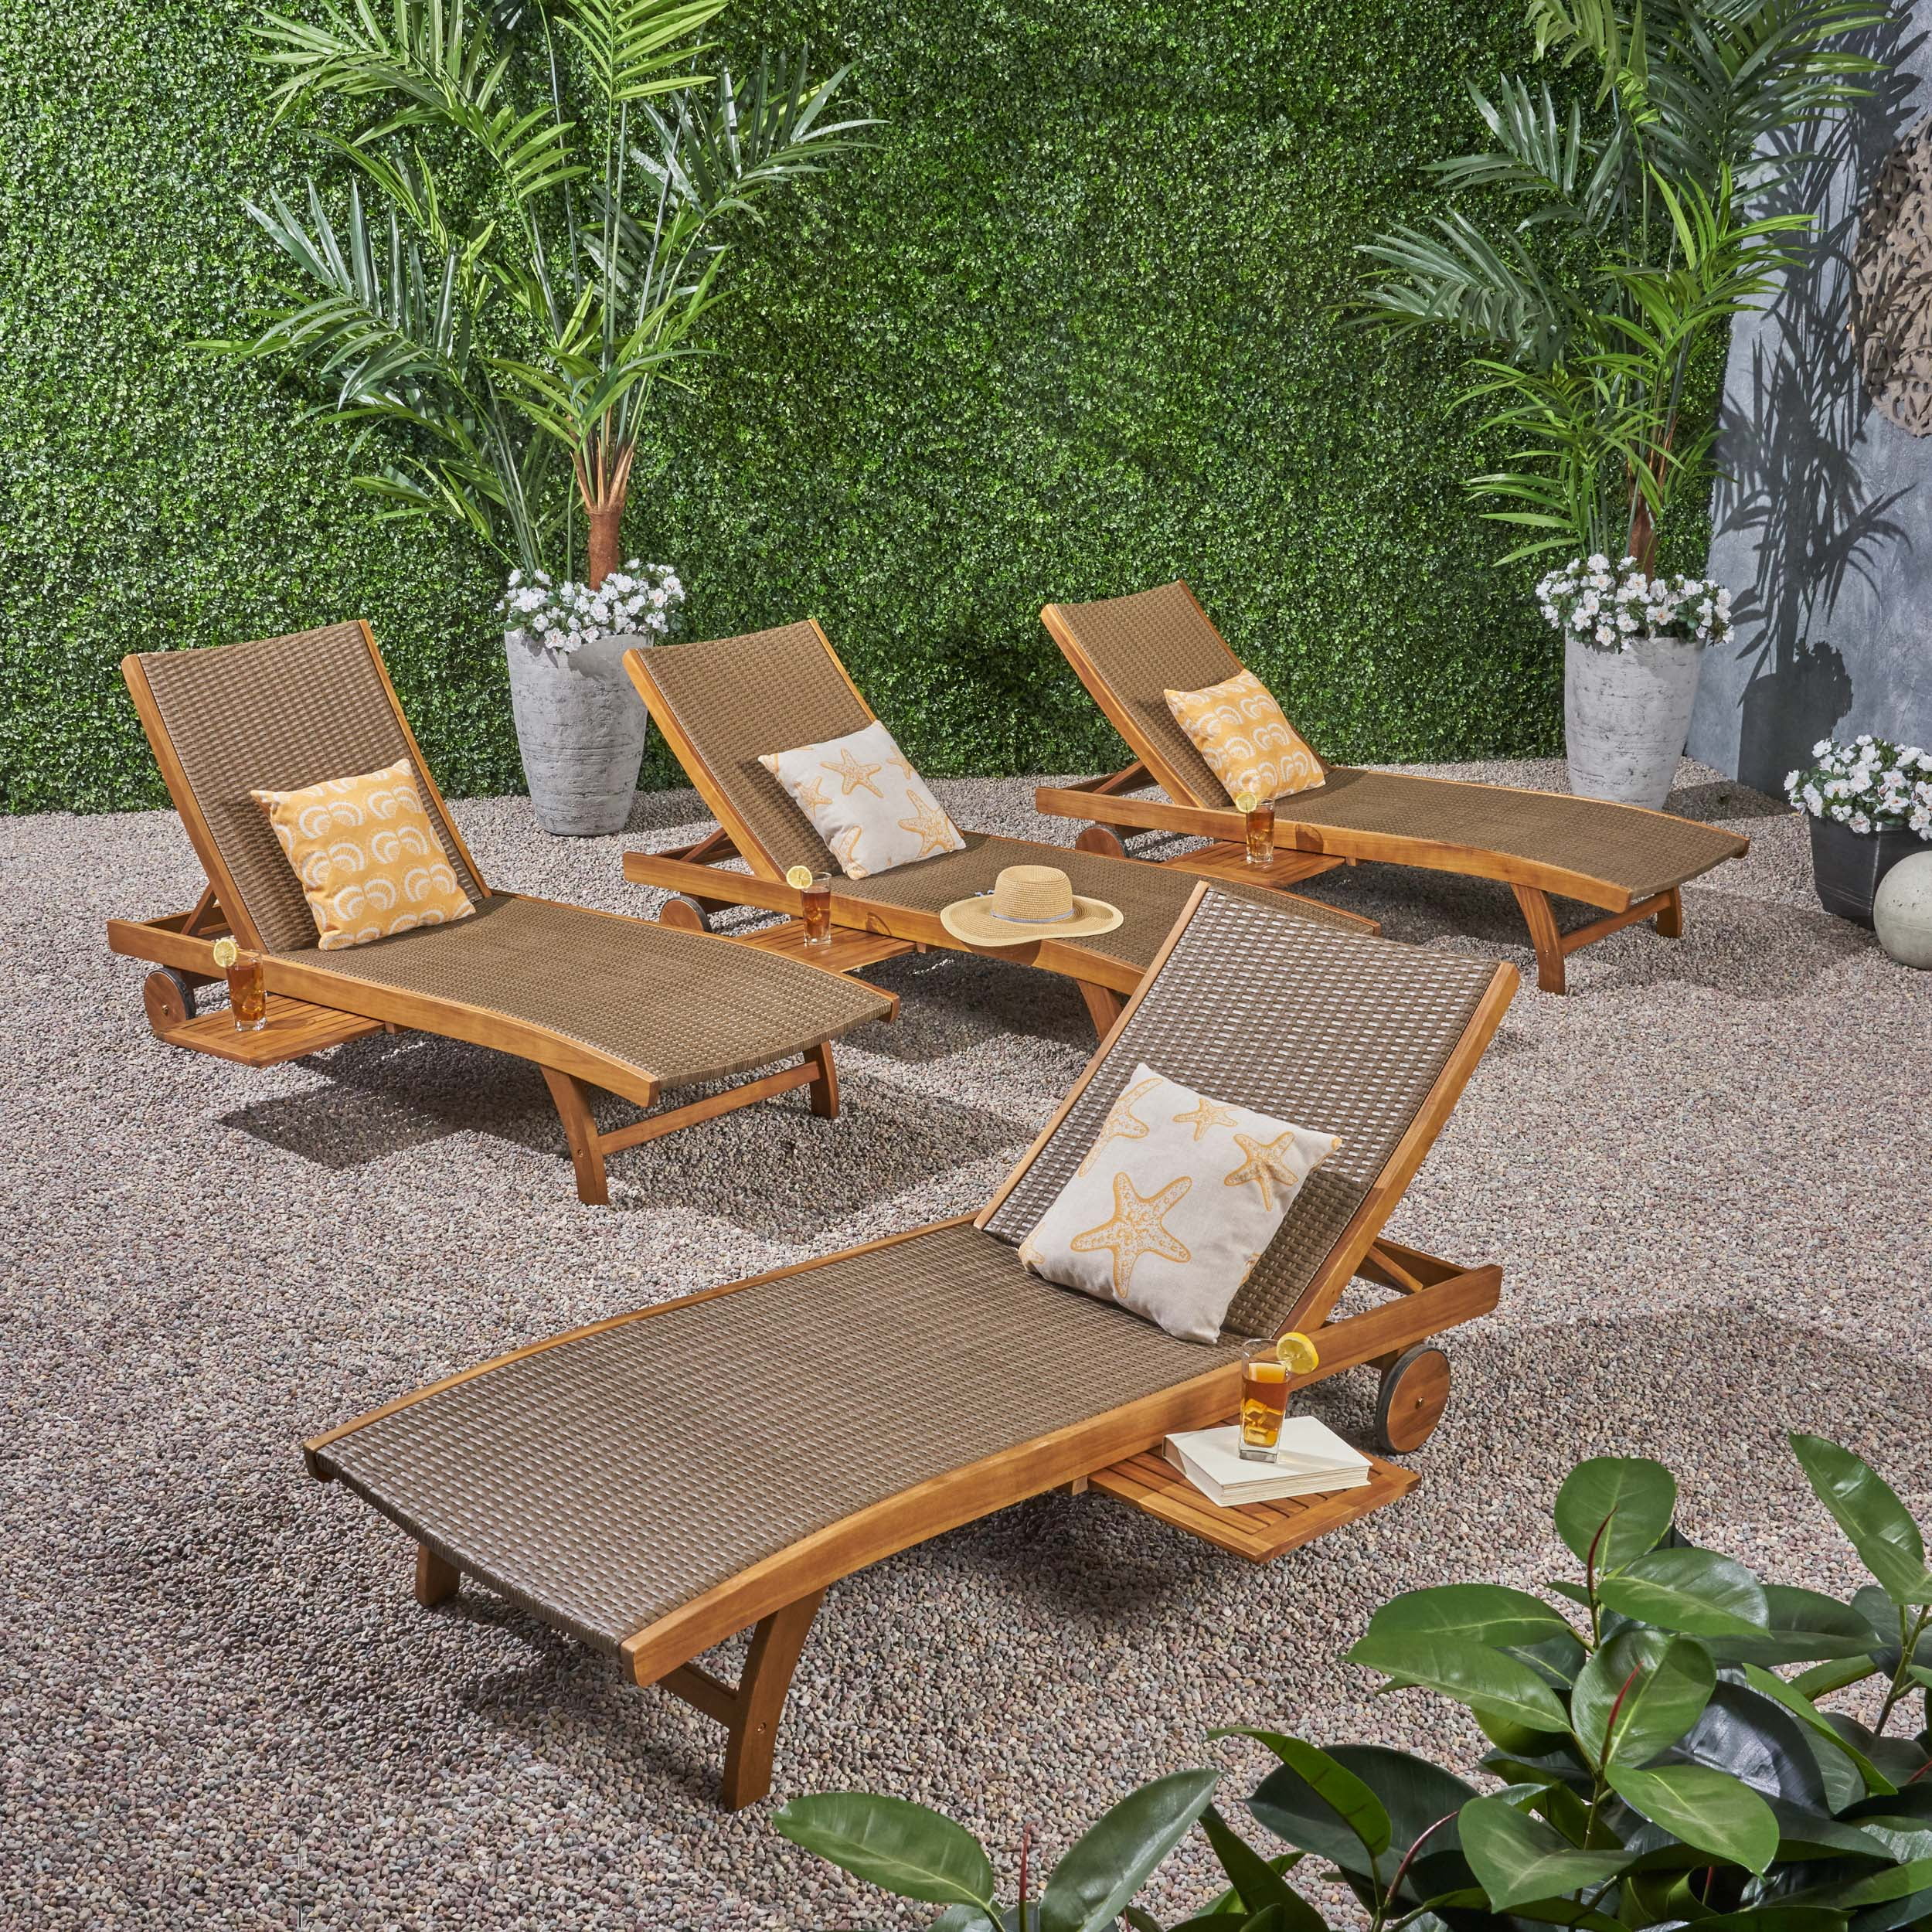 Wood Chaise Lounge Outdoor Garden Patio Backyard Recliner Chair W/End Tray/Table 